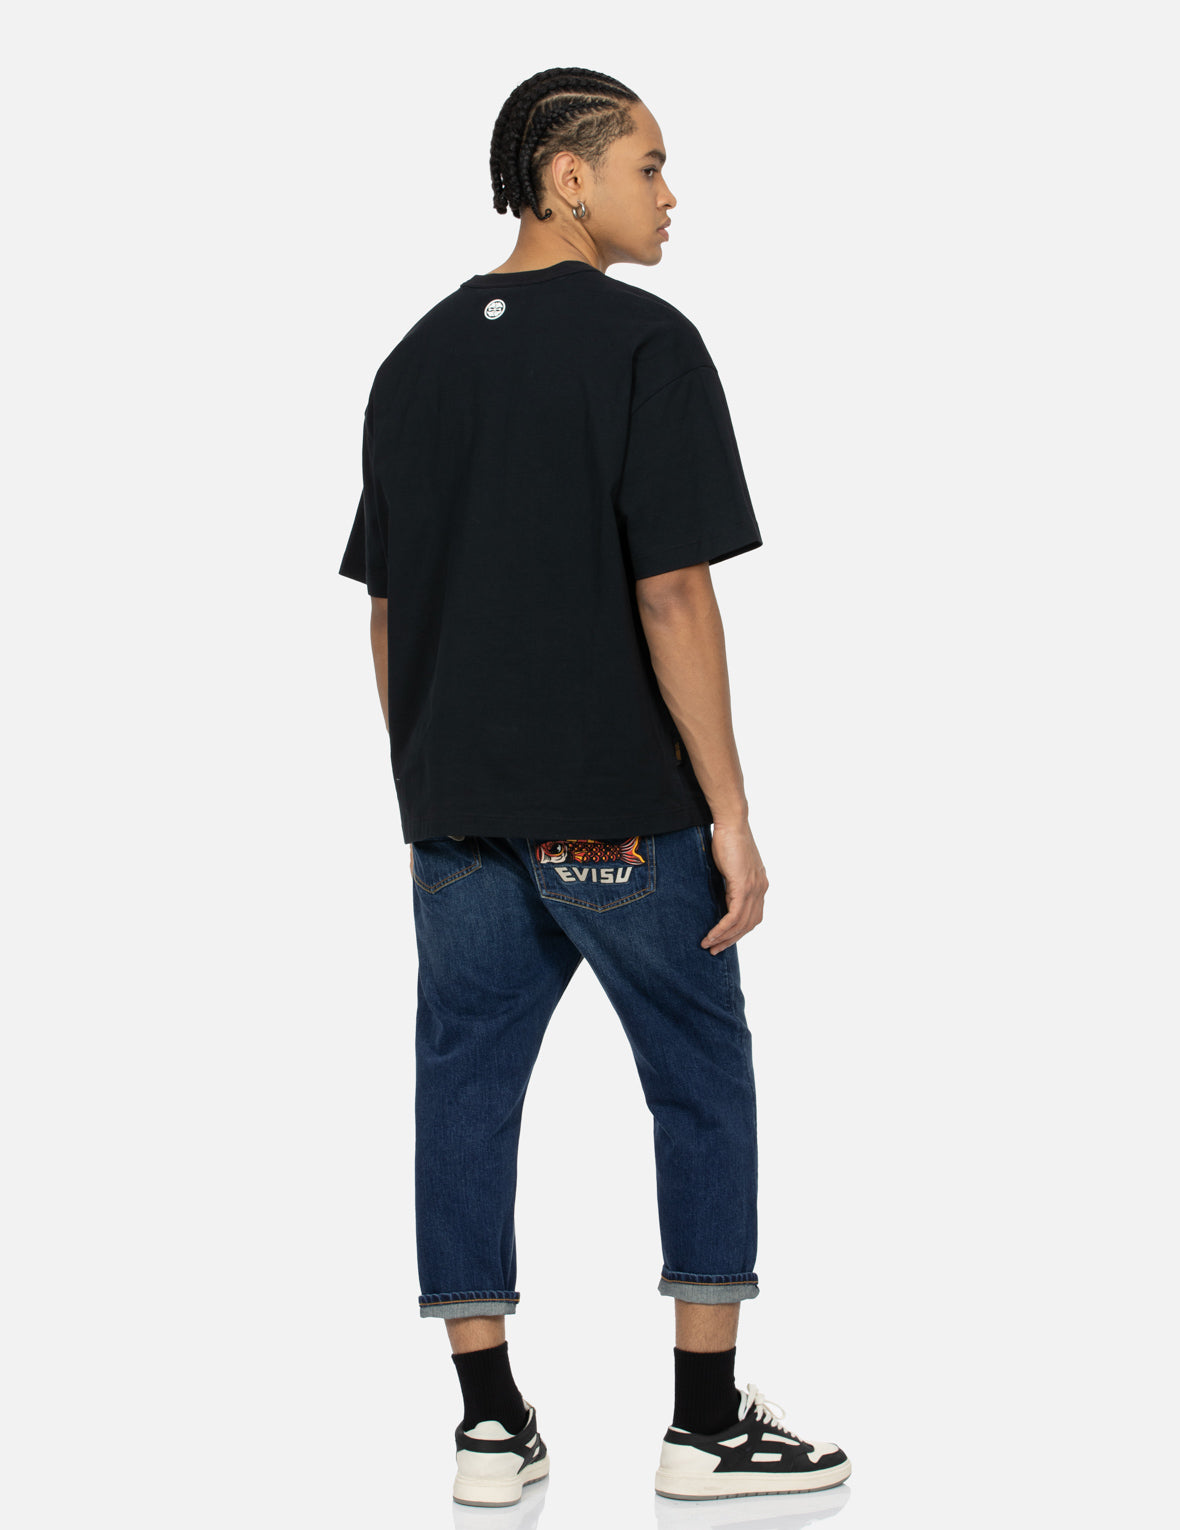 Evisu Koinobori Print And Seagull Embroidery Cropped-Fit Jeans #2027